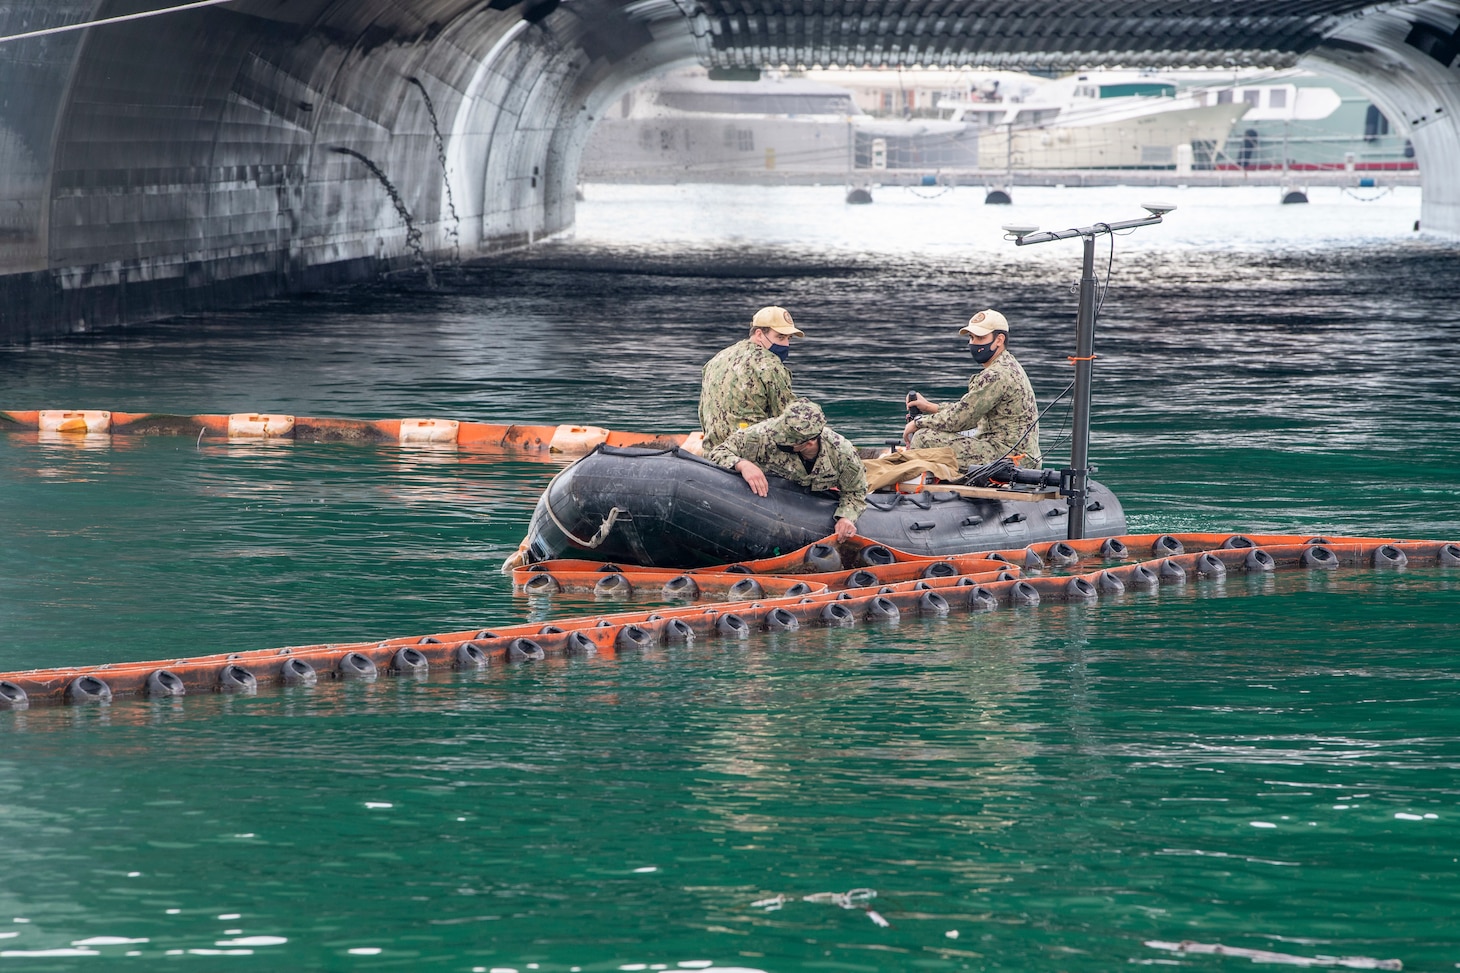 Underwater Construction Team (UCT) 1, from Virginia Beach, VA, move the spill containment barrier while utilizing the Norbit Multi-beam to conduct hydro-graphic survey in Gaeta, Italy, Dec. 15, 2020.